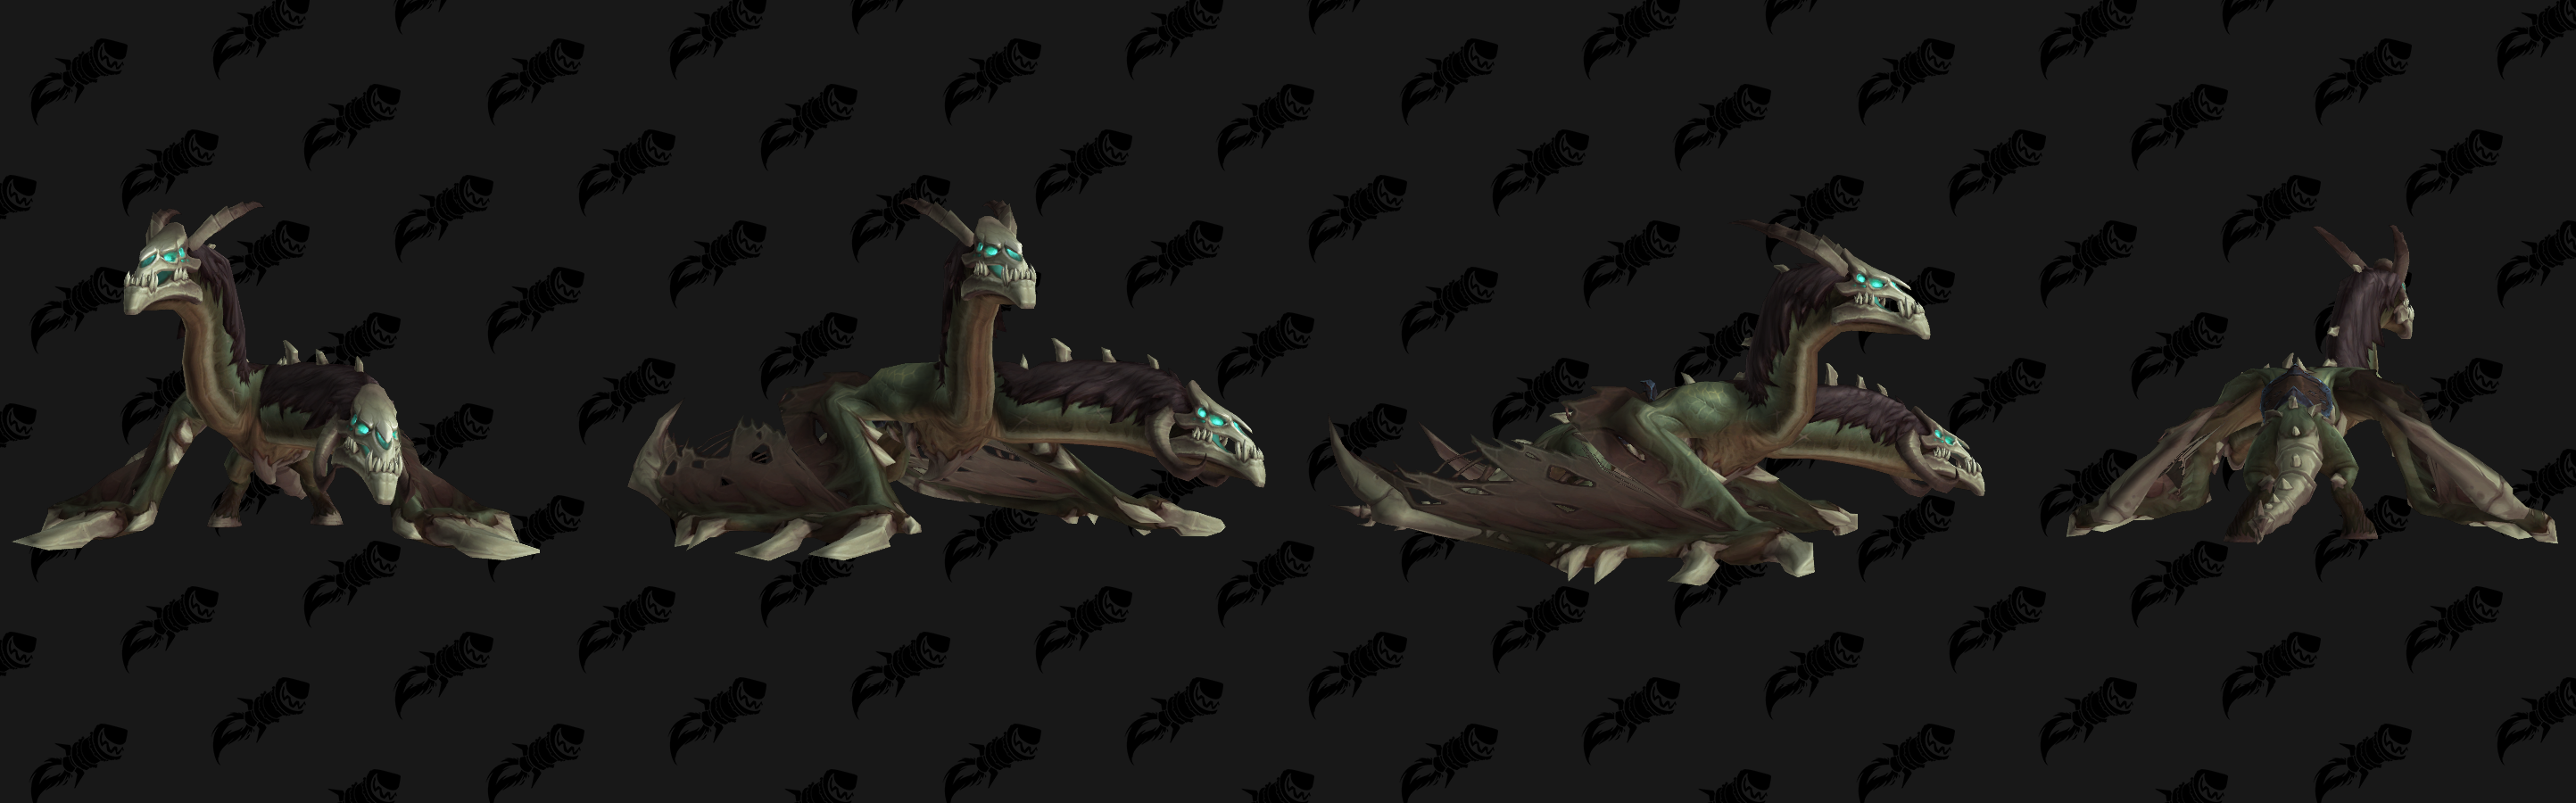 Callow Flayedwing Found in Shadowlands - Cointained Inside Blight-Touched  Egg - Wowhead News